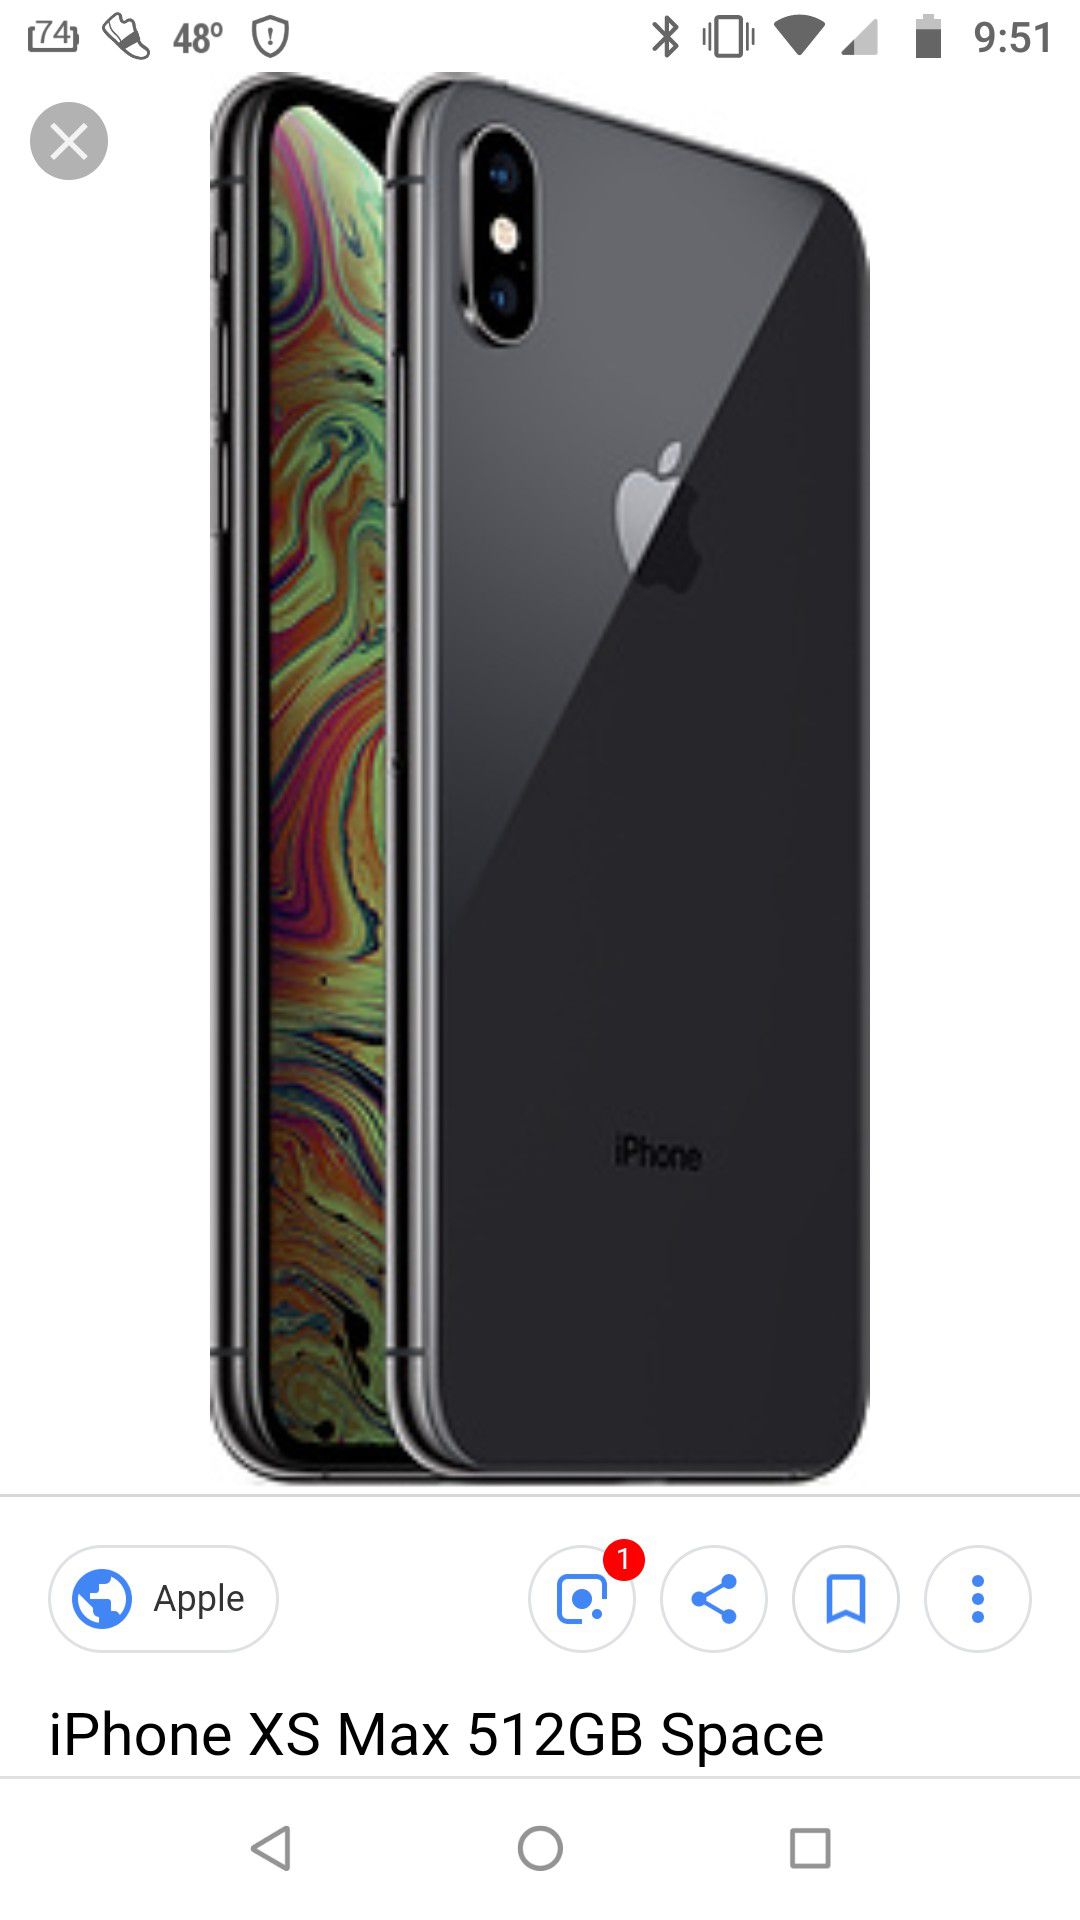 Brand new iPhone Xs max 512 gb unlocked (space grey) for Sale in